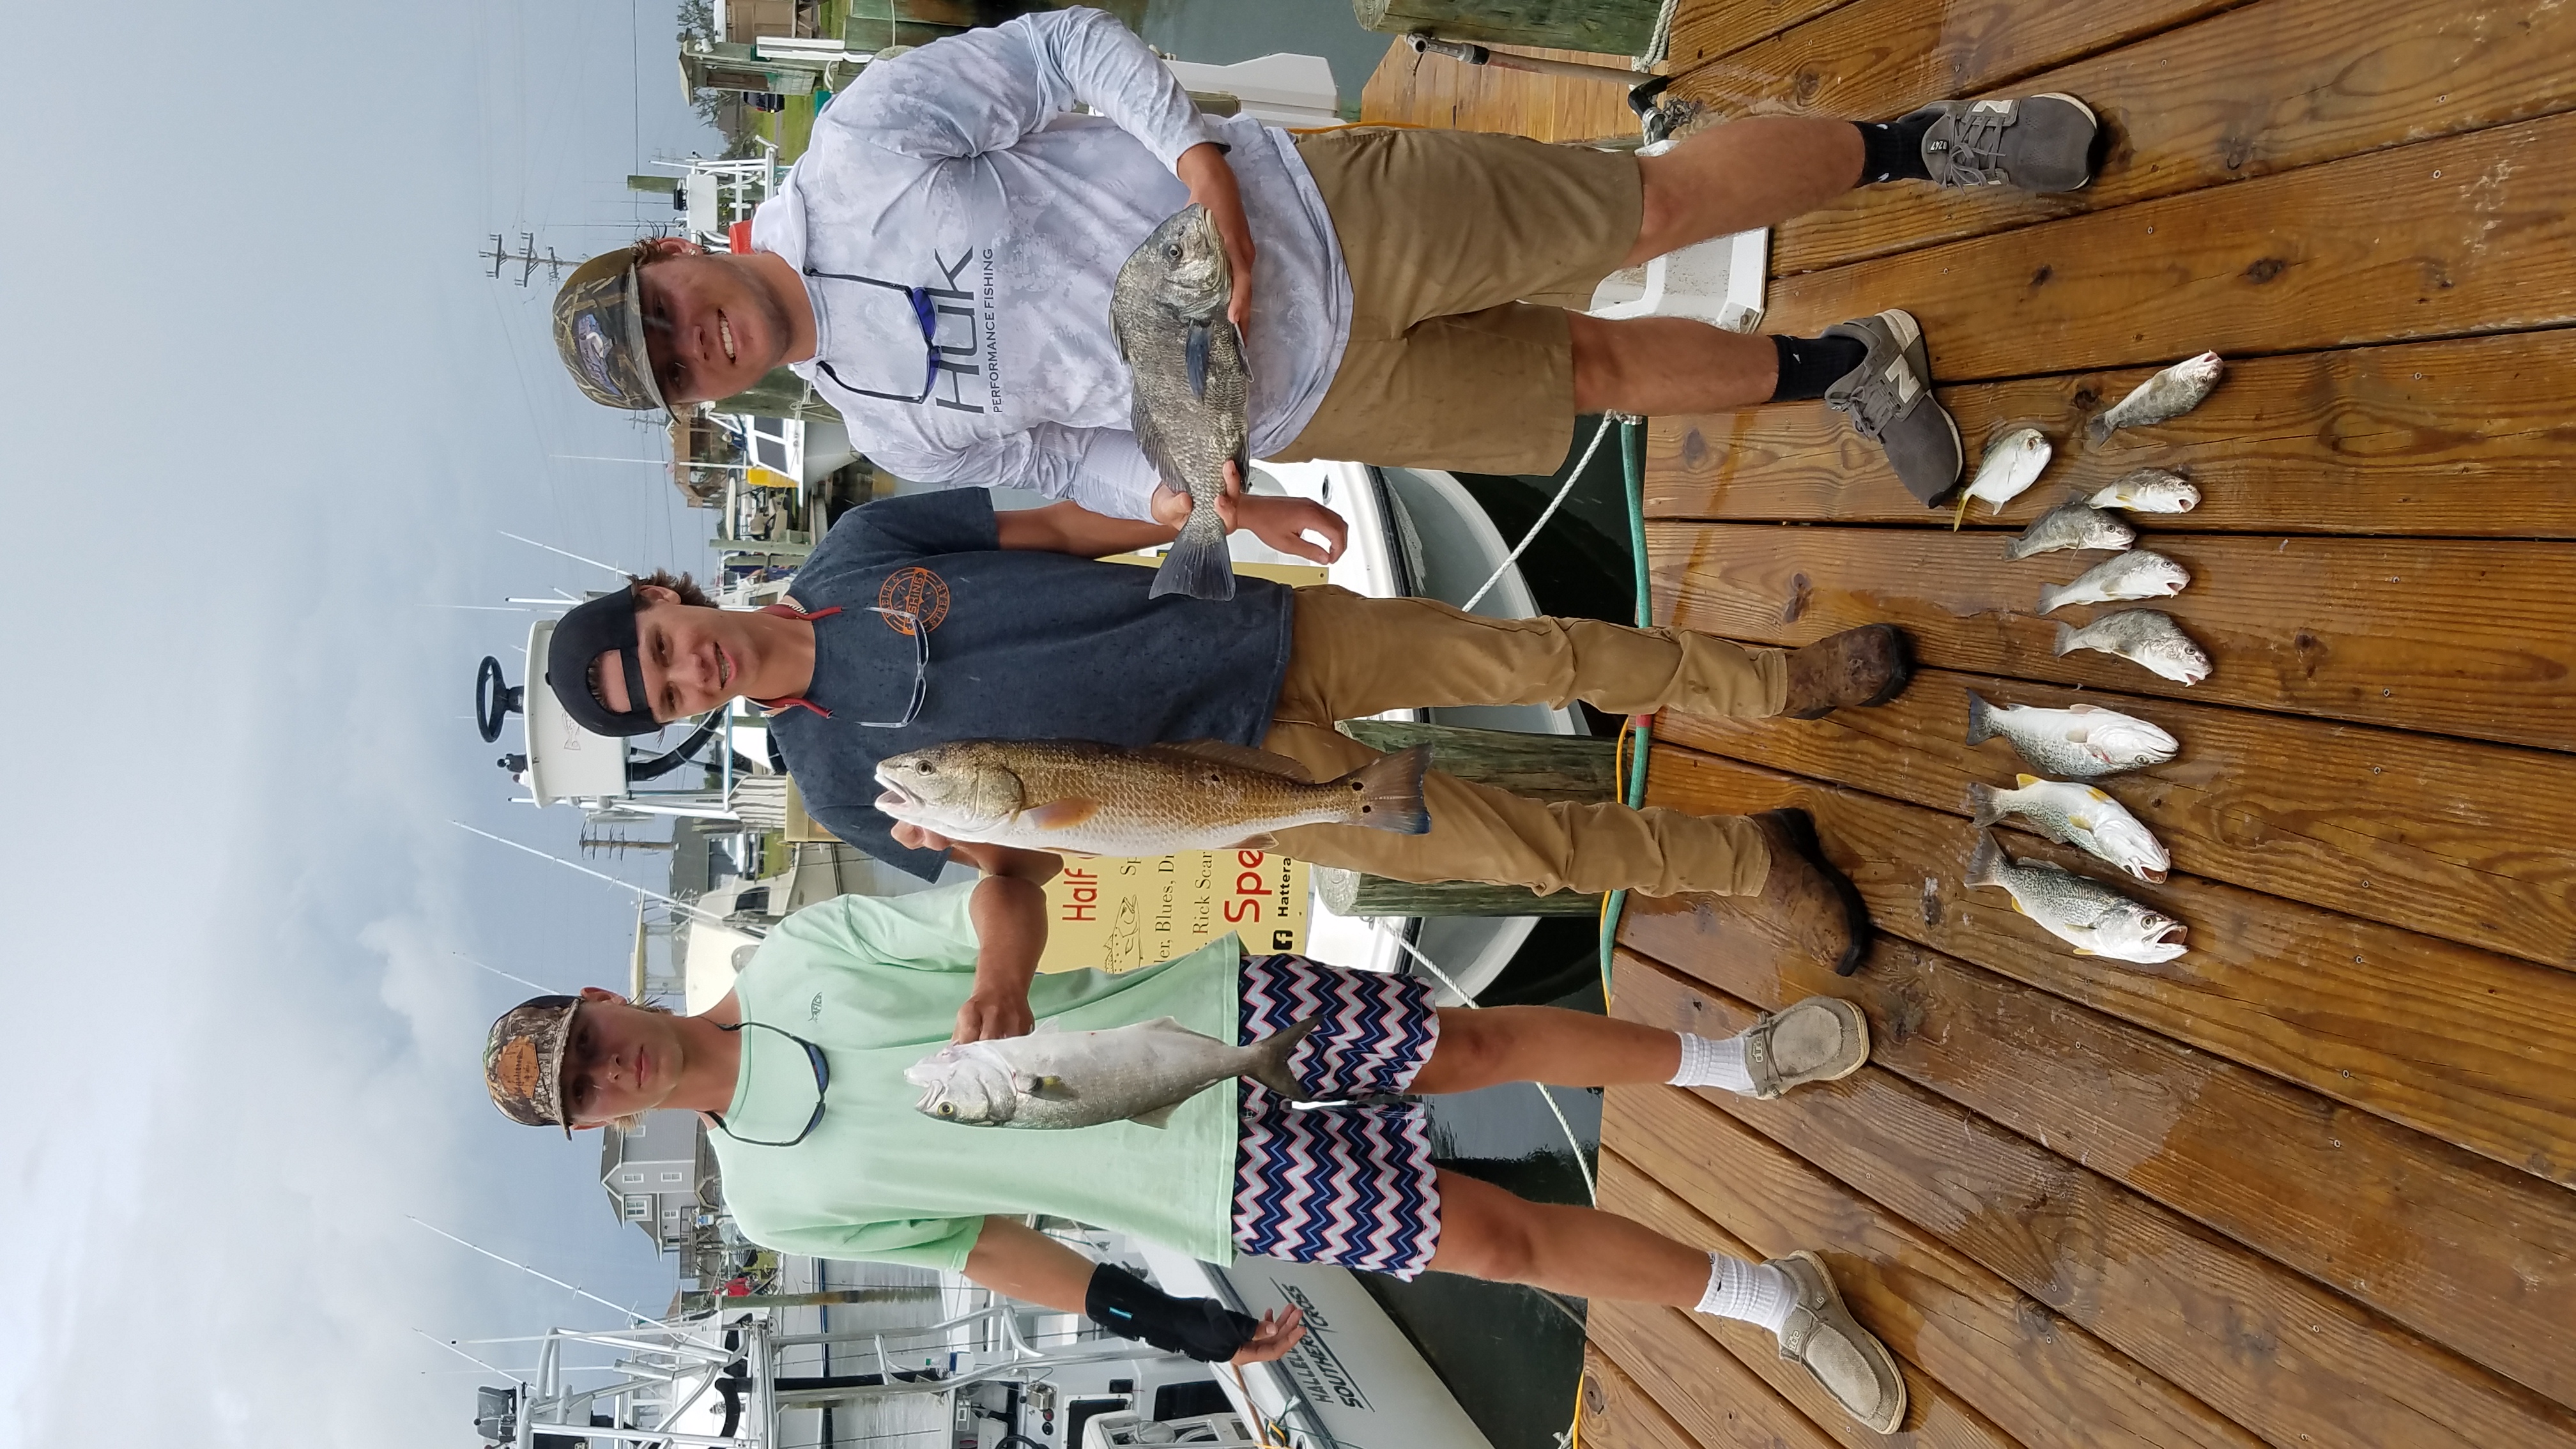 Speck-Tackler Fishing Teach's Lair Inshore Charters